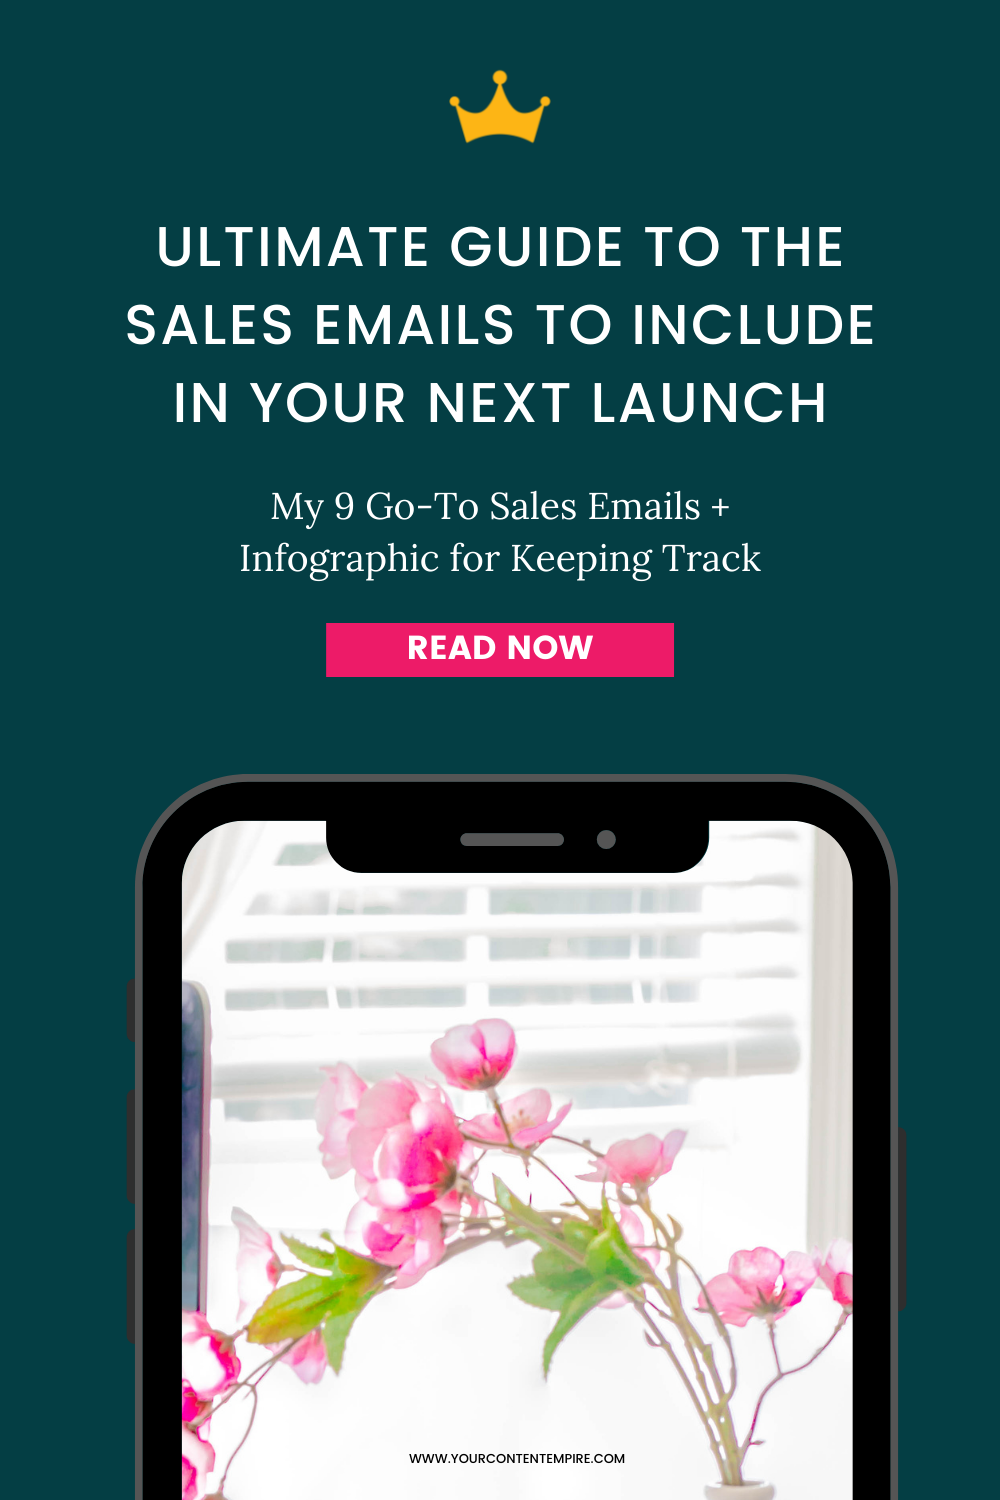 Ultimate Guide to the Sales Emails to Include in Your Next Launch